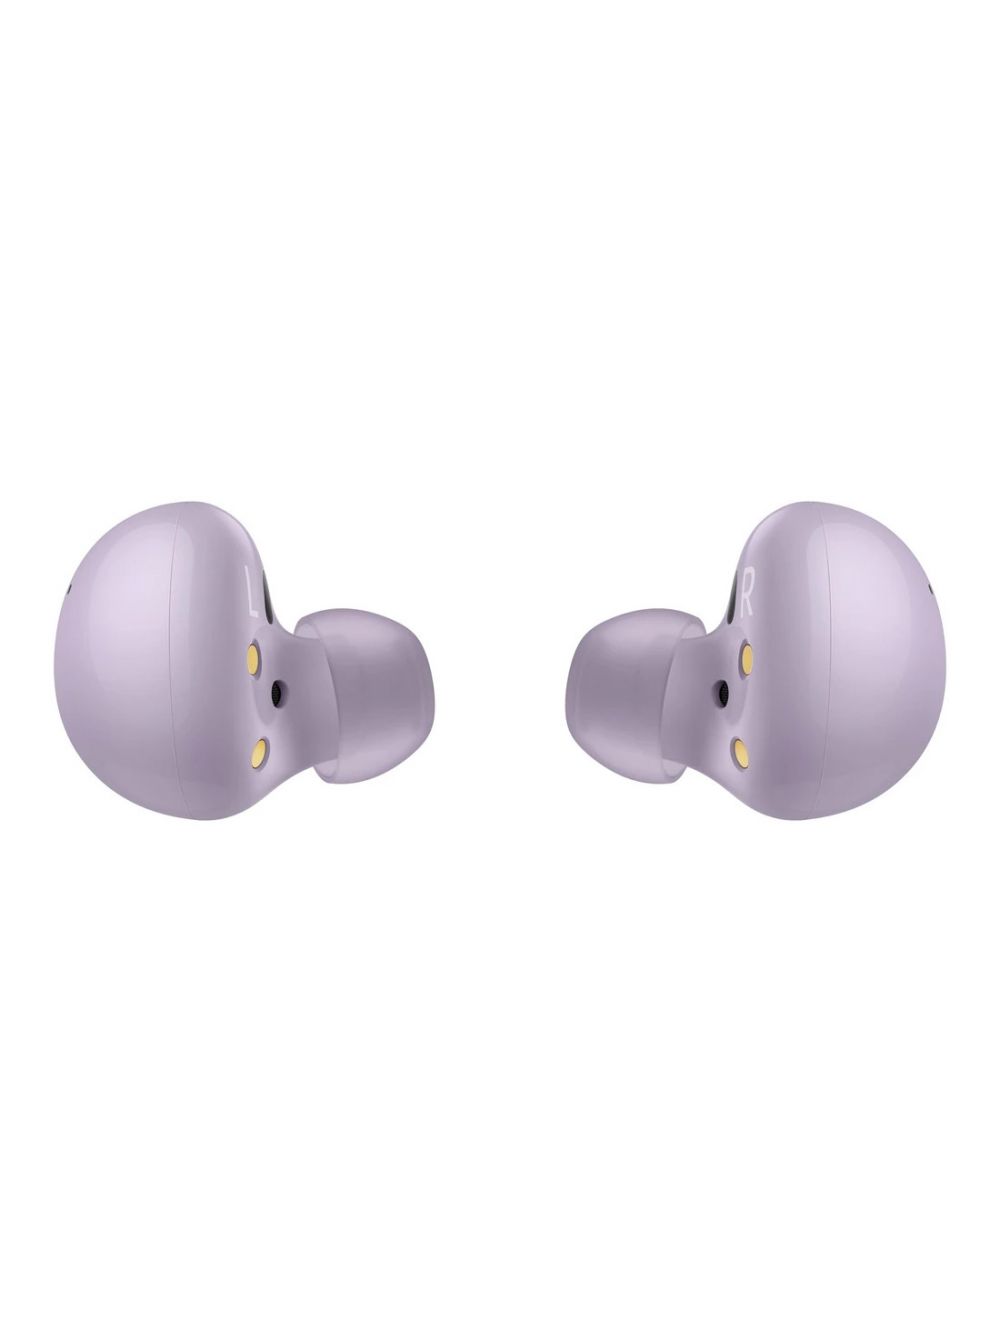 Samsung Galaxy Buds 2 Wireless Active Noise Cancelling Earbuds - Violet